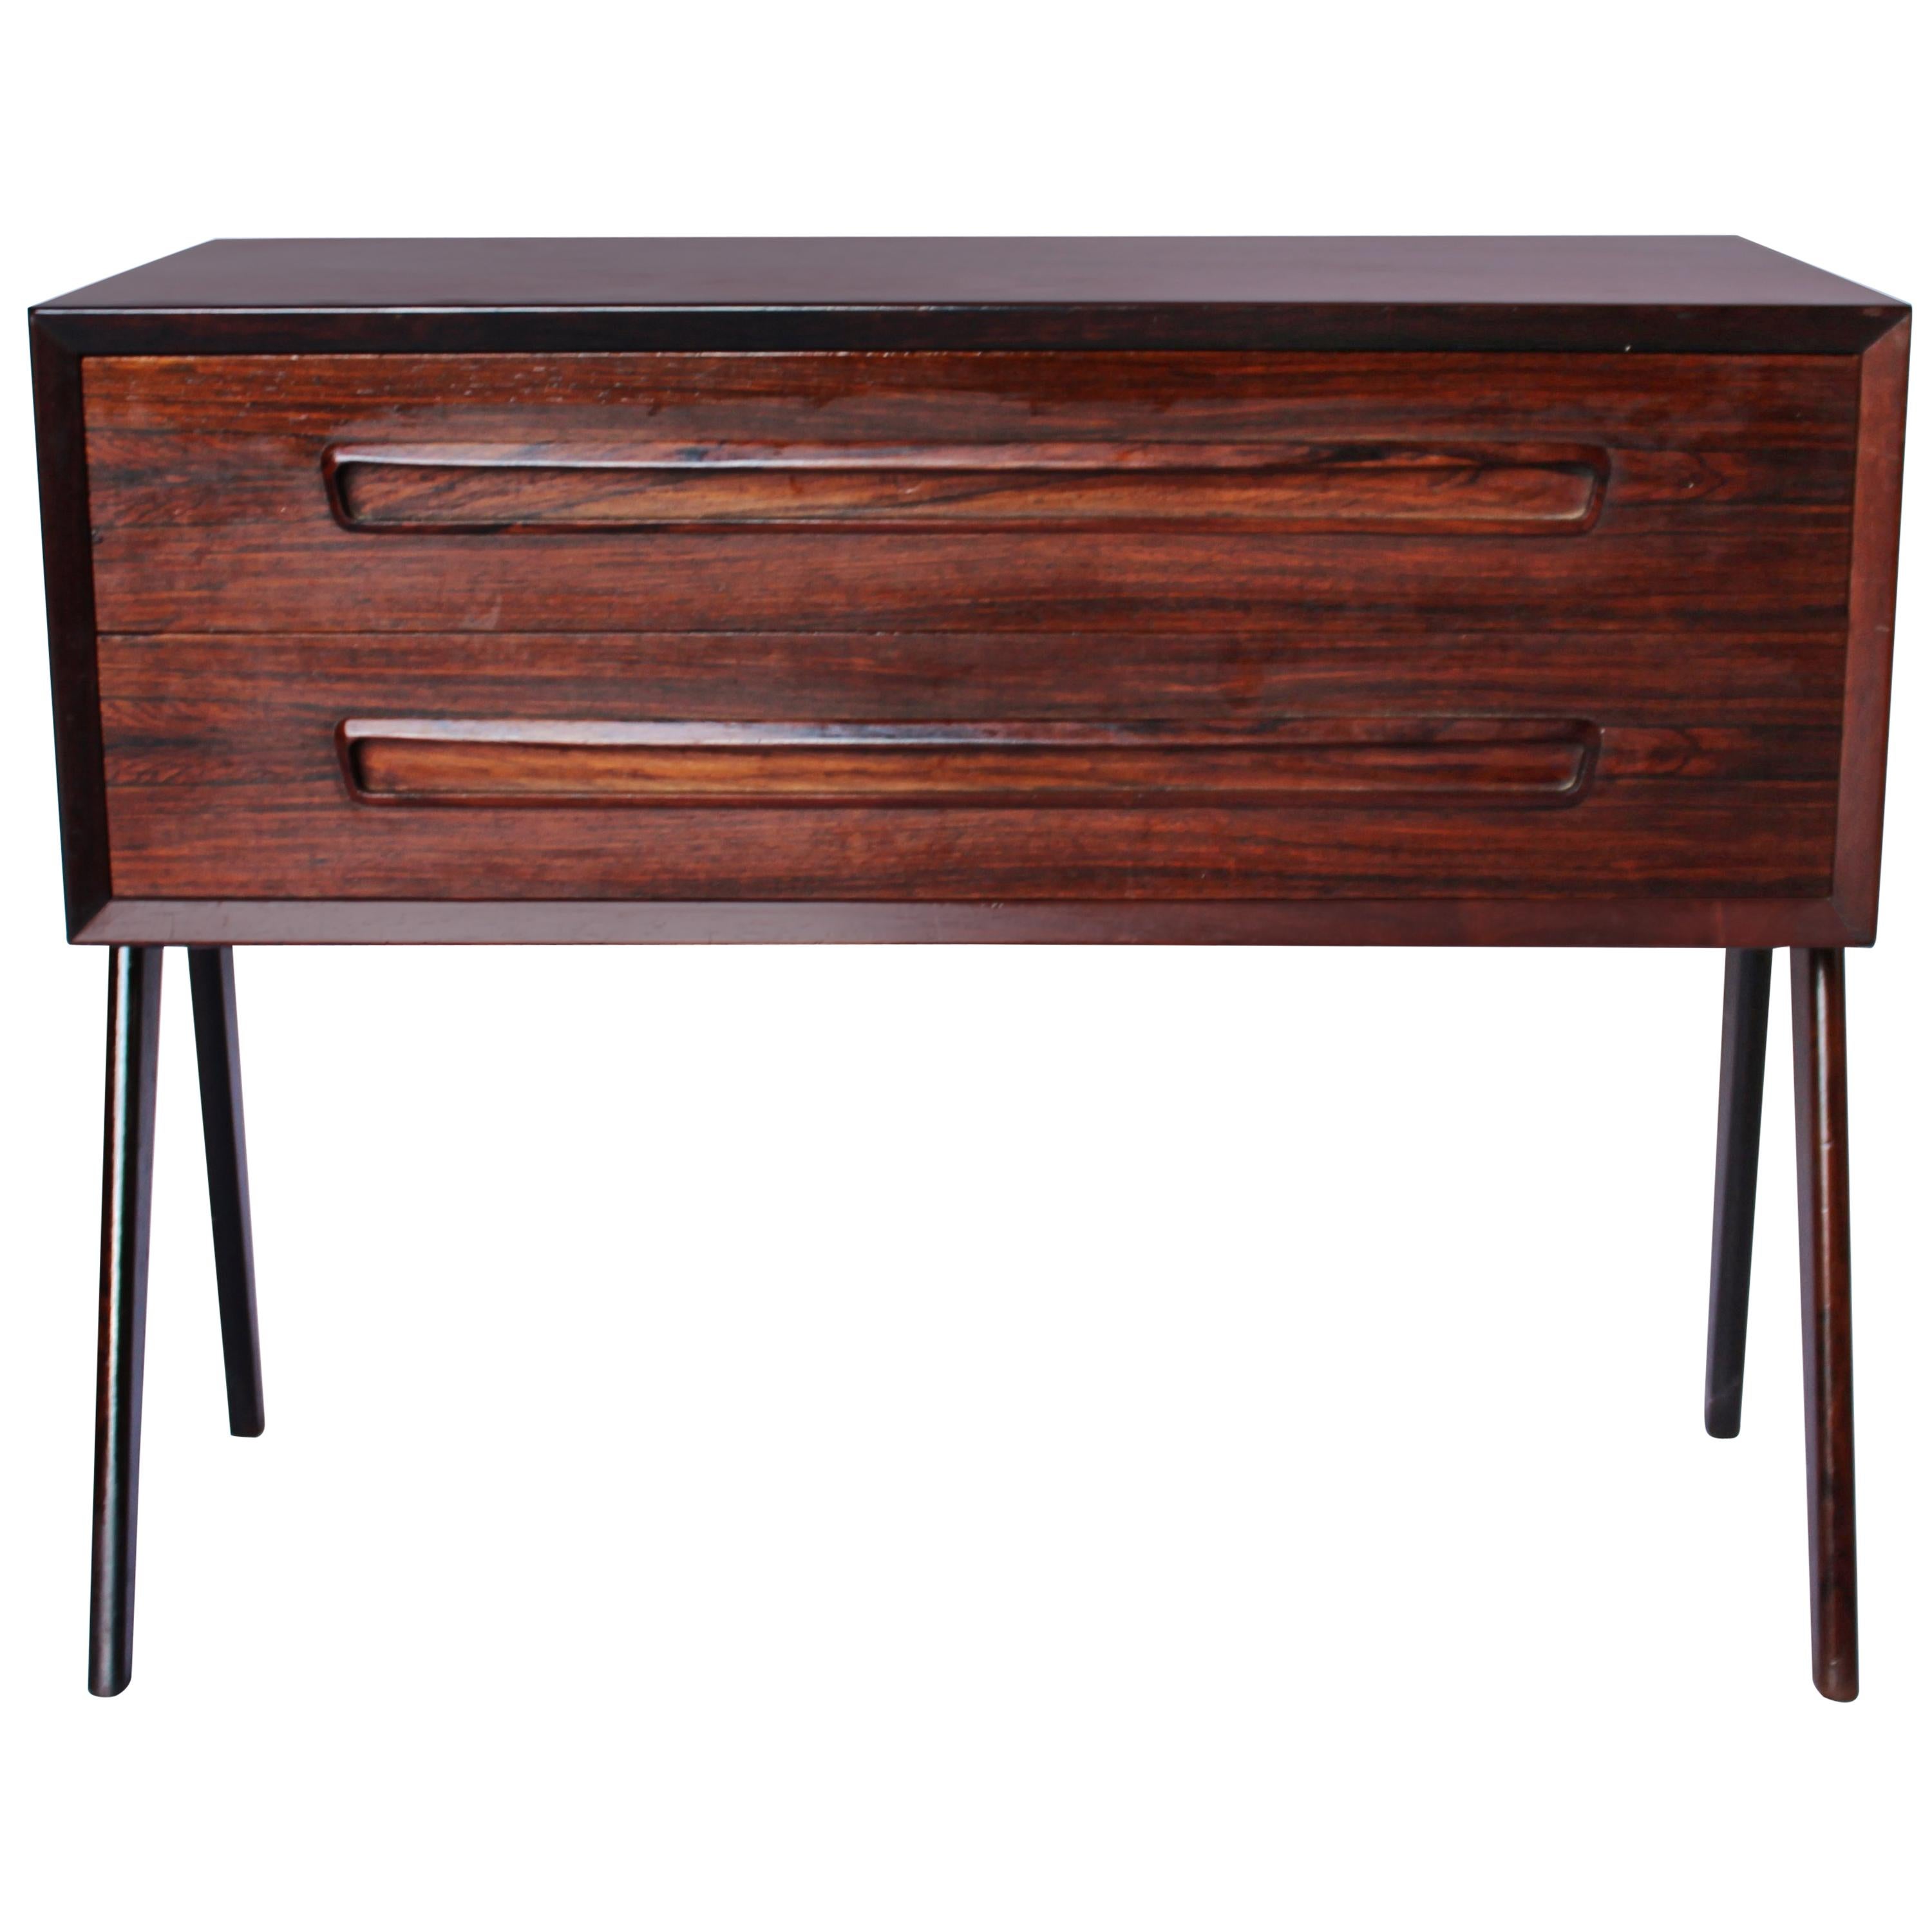 Small Rosewood Chest of Drawers with Two Drawers of Danish Design from the 1960s